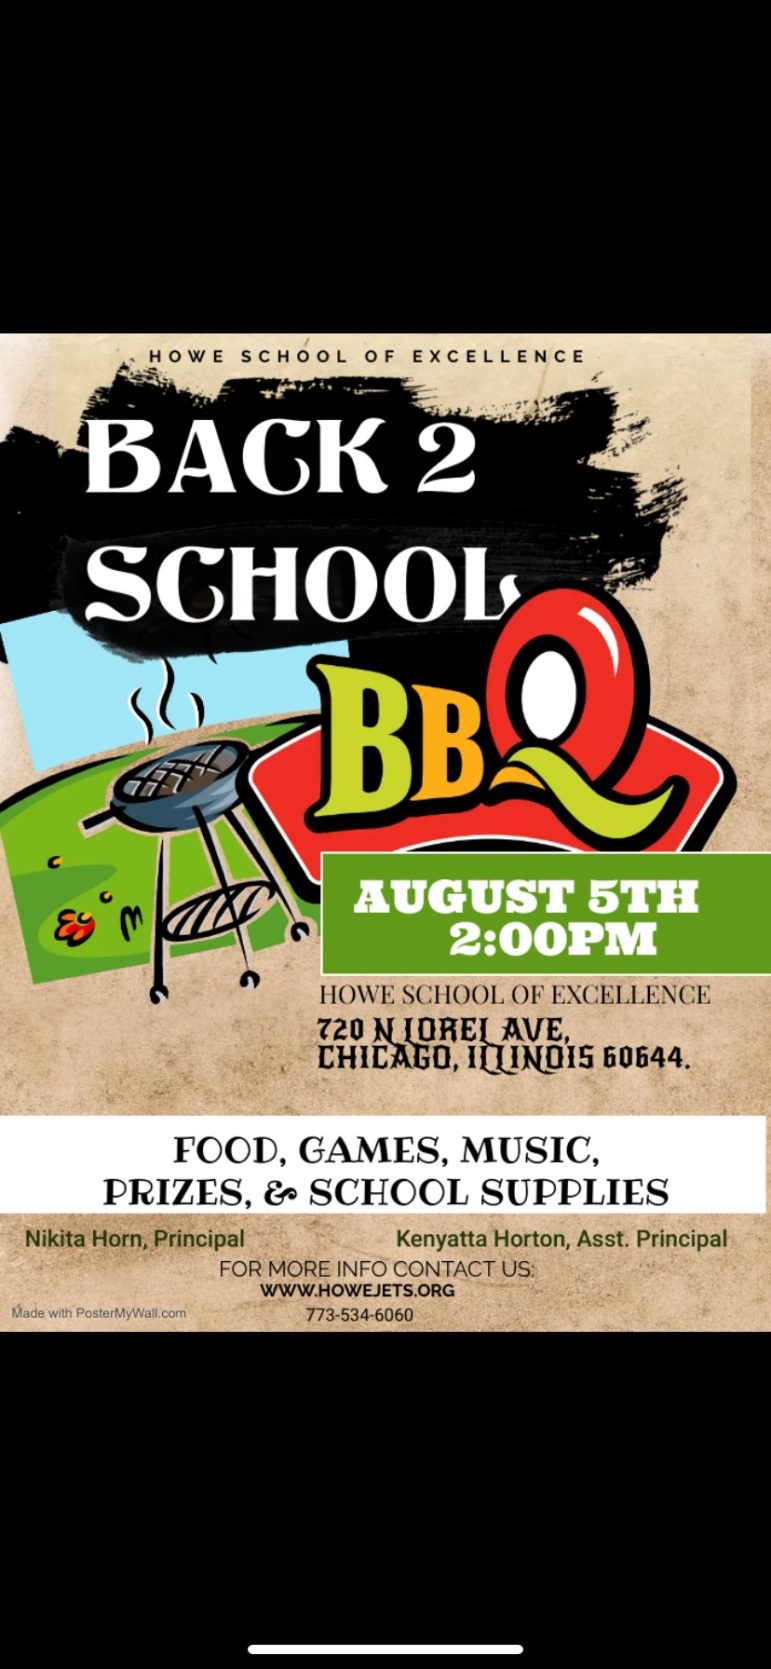 There will be food, games, music, prizes and school supplies at the event.